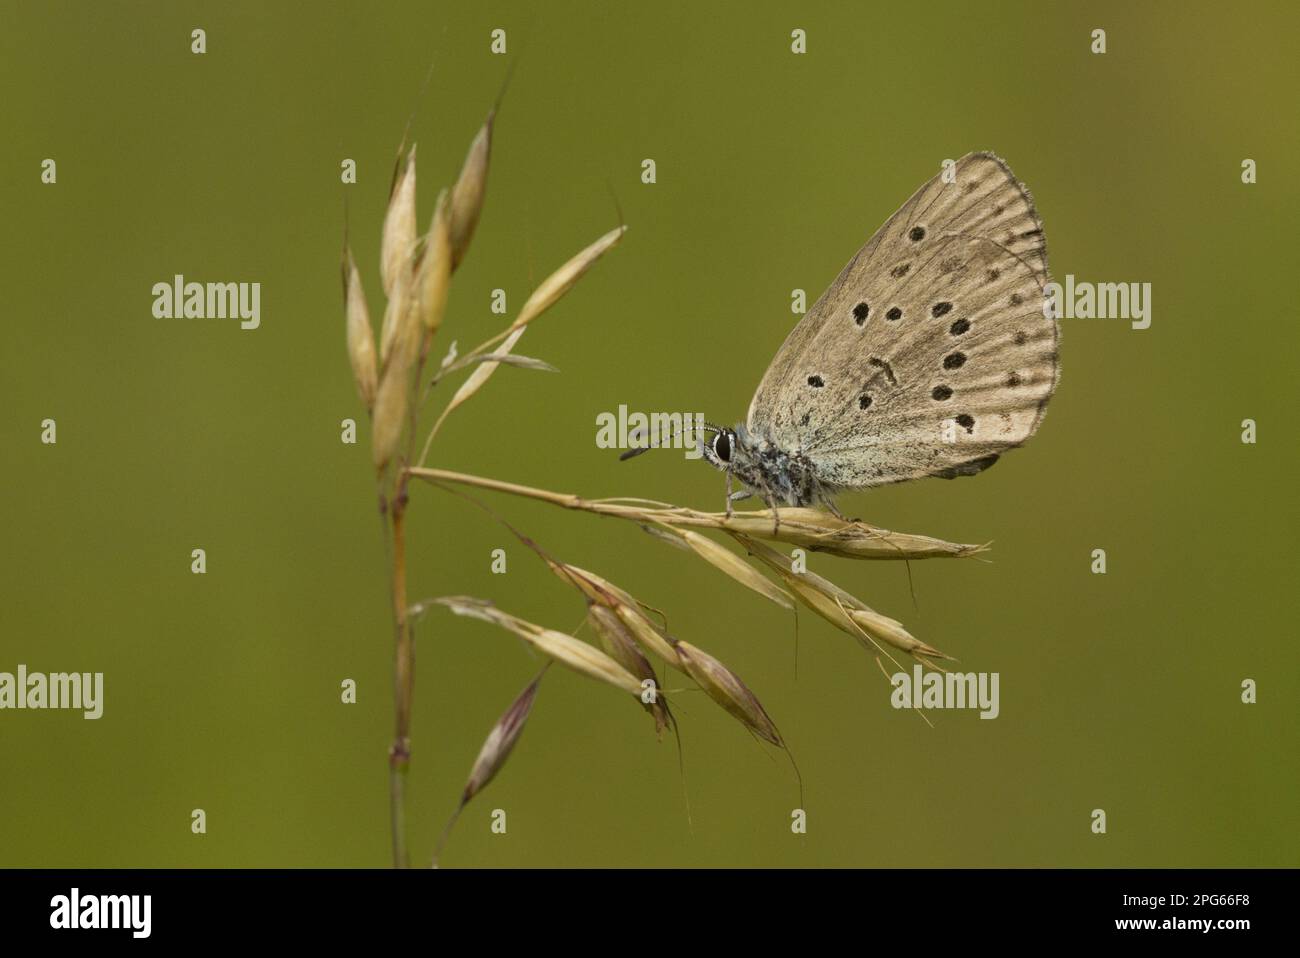 Mountain alcon blue (Phengaris rebeli) Crossed Gentian Blue, Crossed Gentian Blue (Lycaenidae), Other animals, Insects, Butterflies, Animals Stock Photo